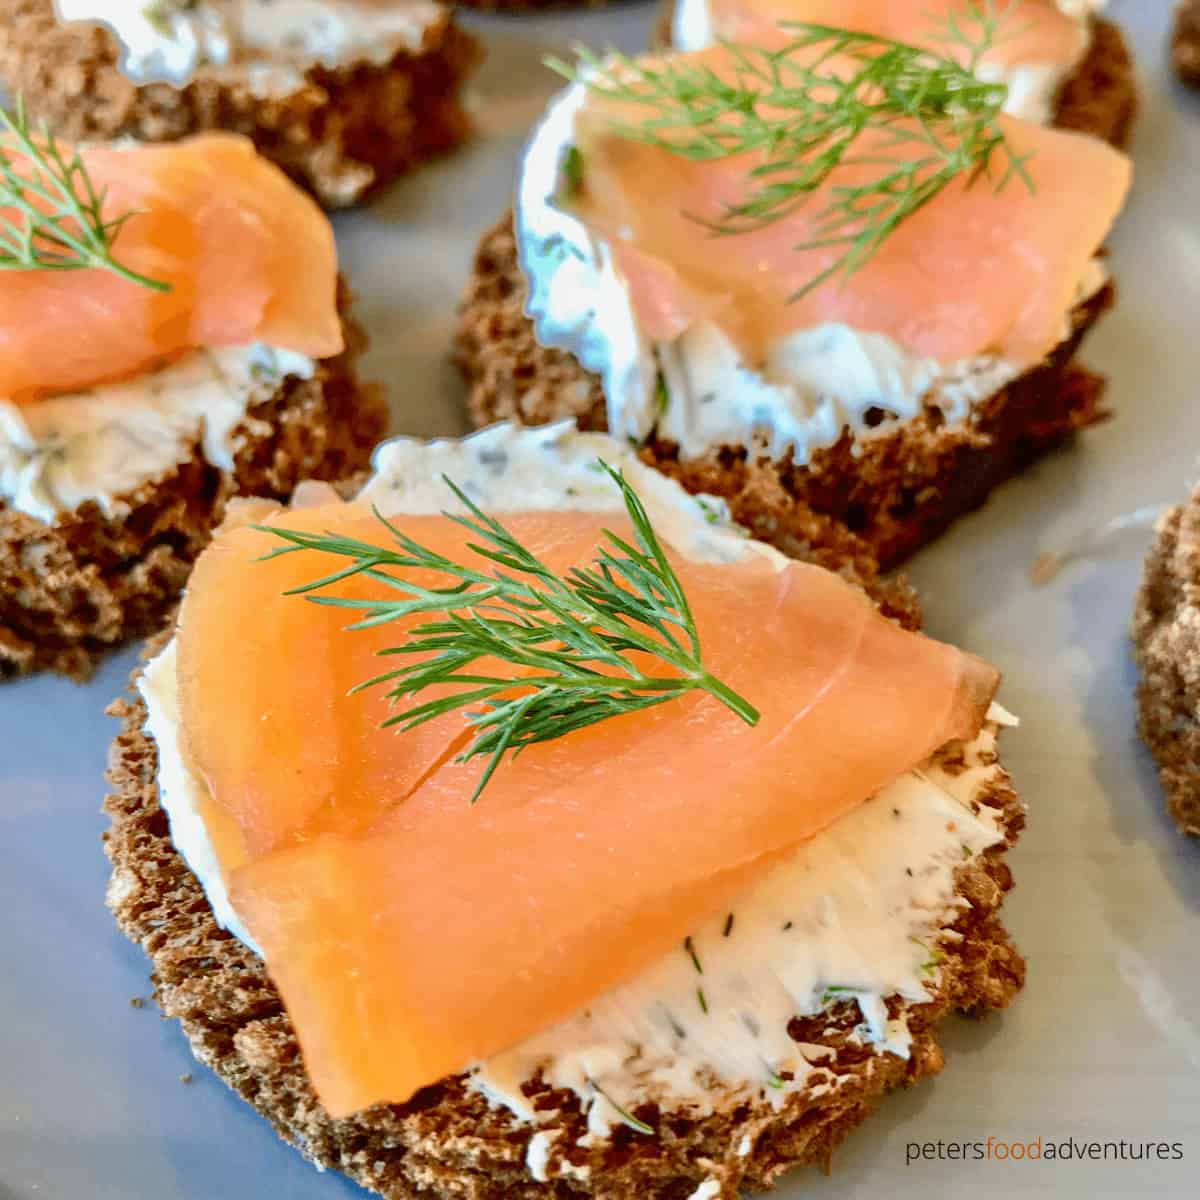 An easy to make appetizer, ready in minutes! Smoked Salmon, dill cream cheese on rye bread rounds (or pumpernickel). This simple 4 ingredients recipe is the perfect salmon canape for the holidays. Smoked Salmon Appetizers